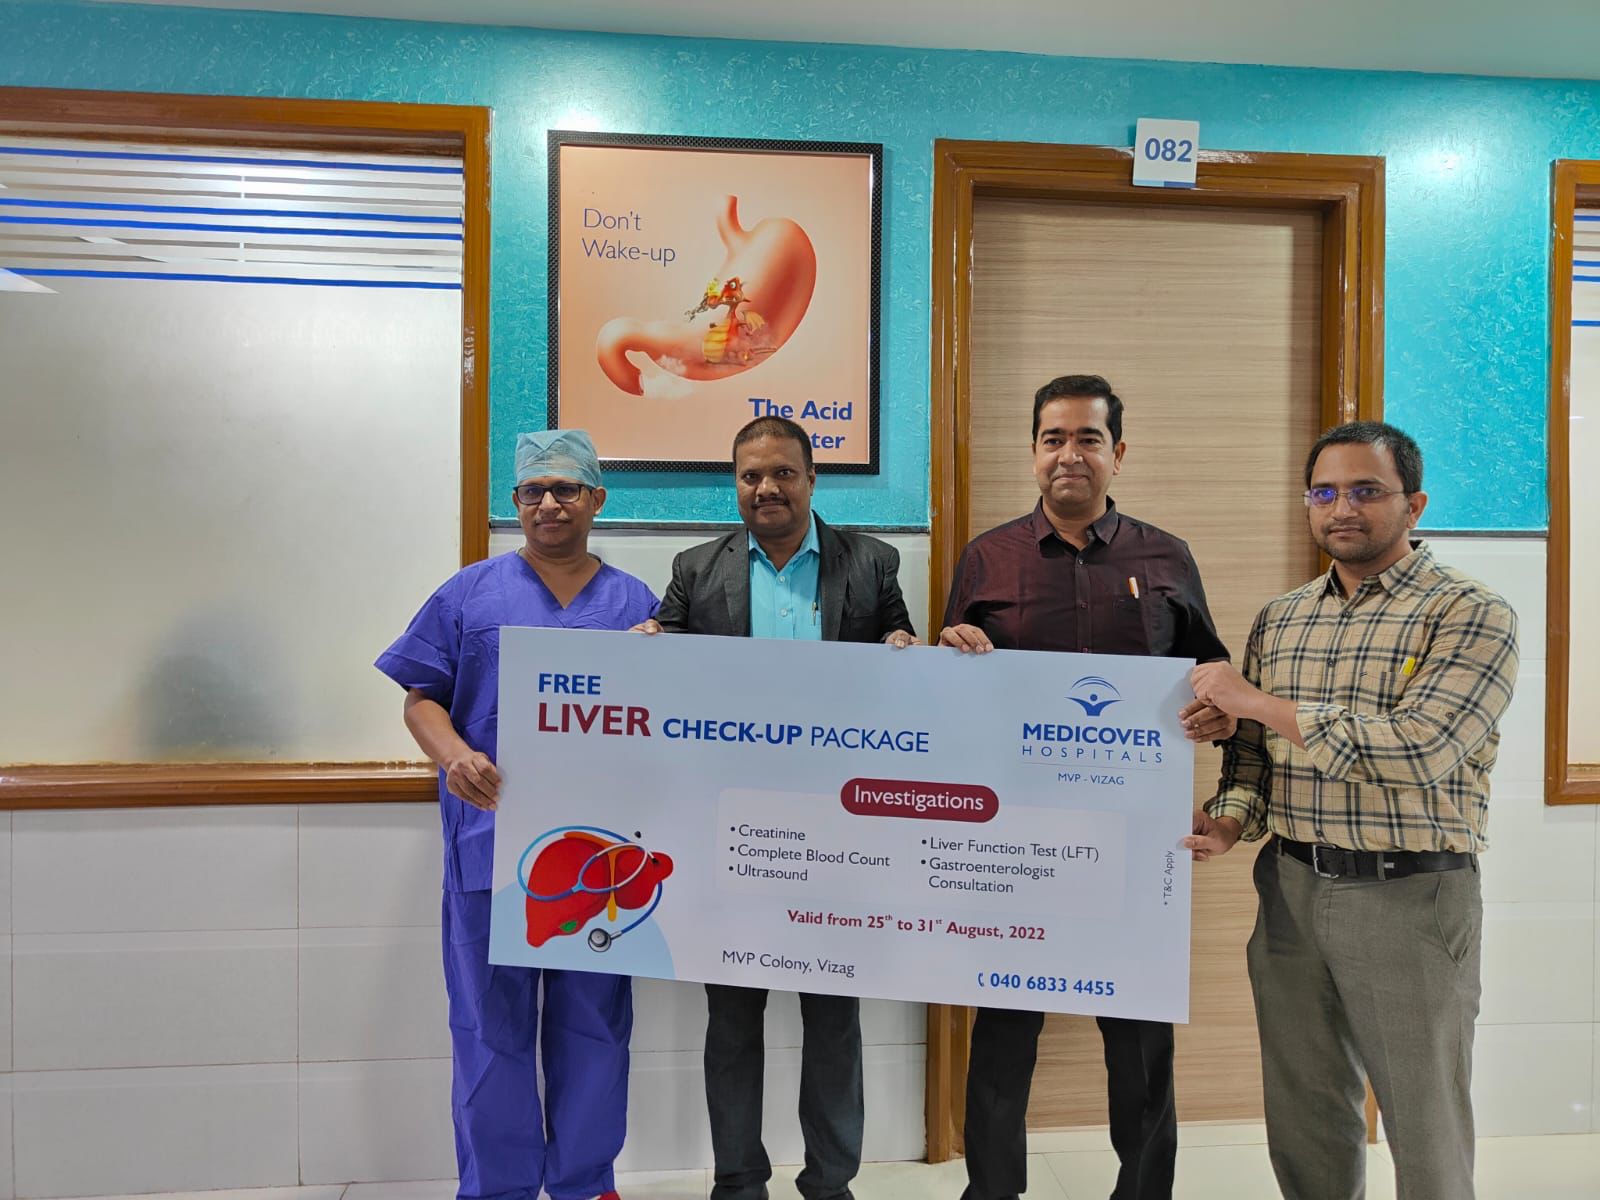 Medicover Hospitals has done Liver Diseases Awareness program and Launched Liver Clinic